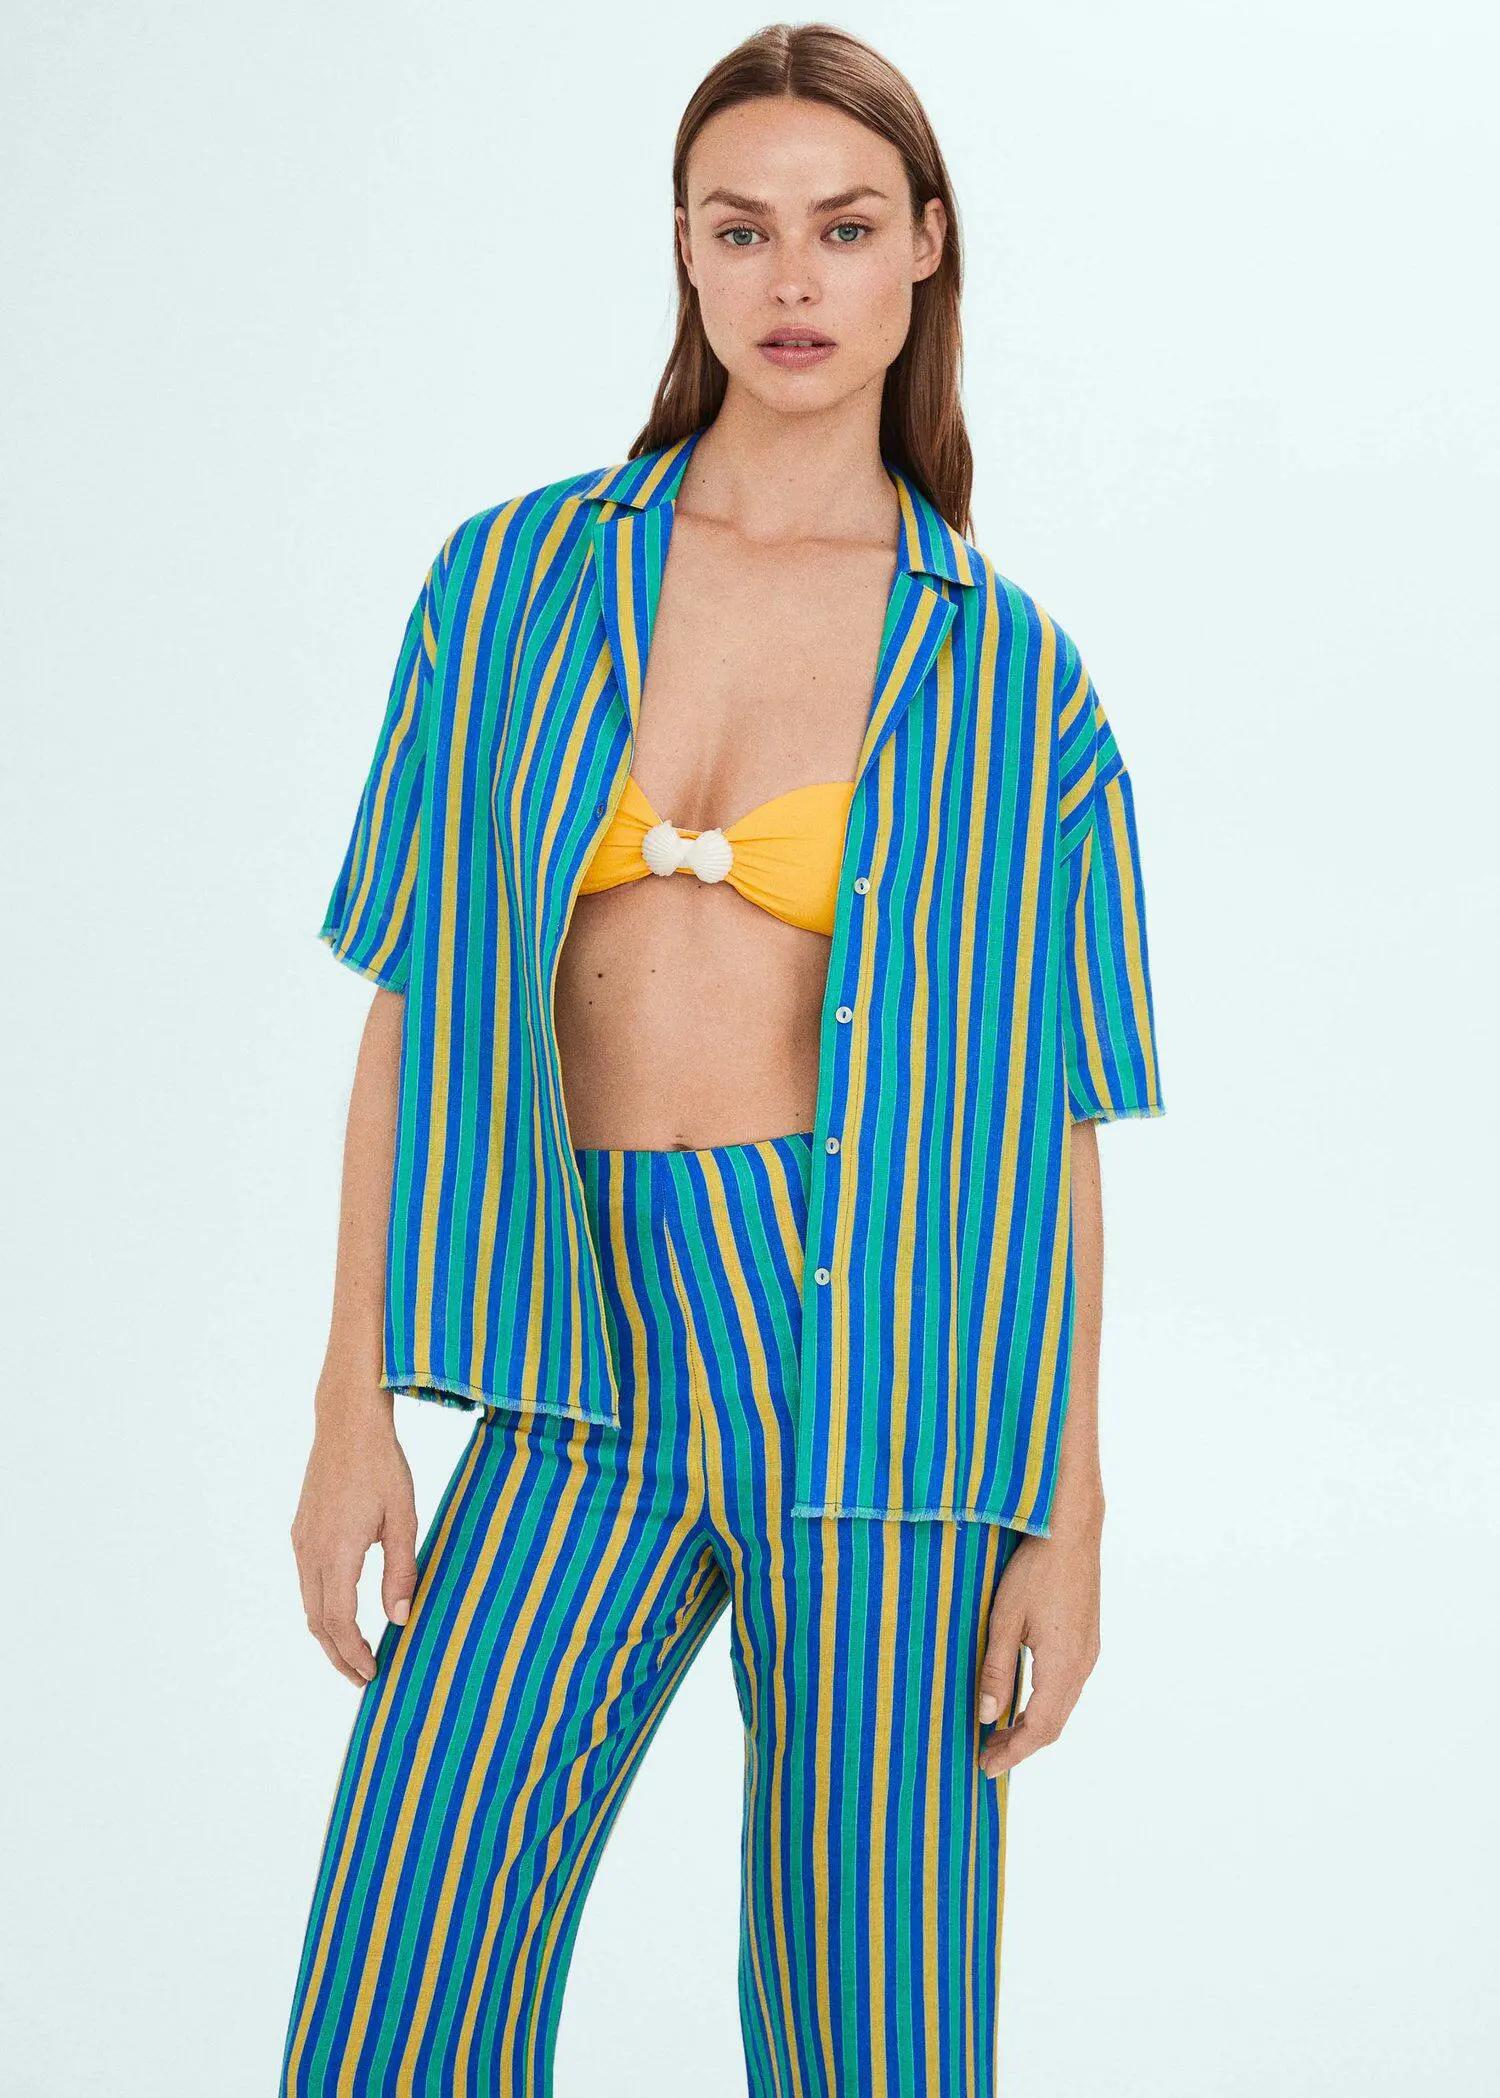 Mango Multi-coloured striped linen shirt. a woman in a blue and yellow striped outfit. 